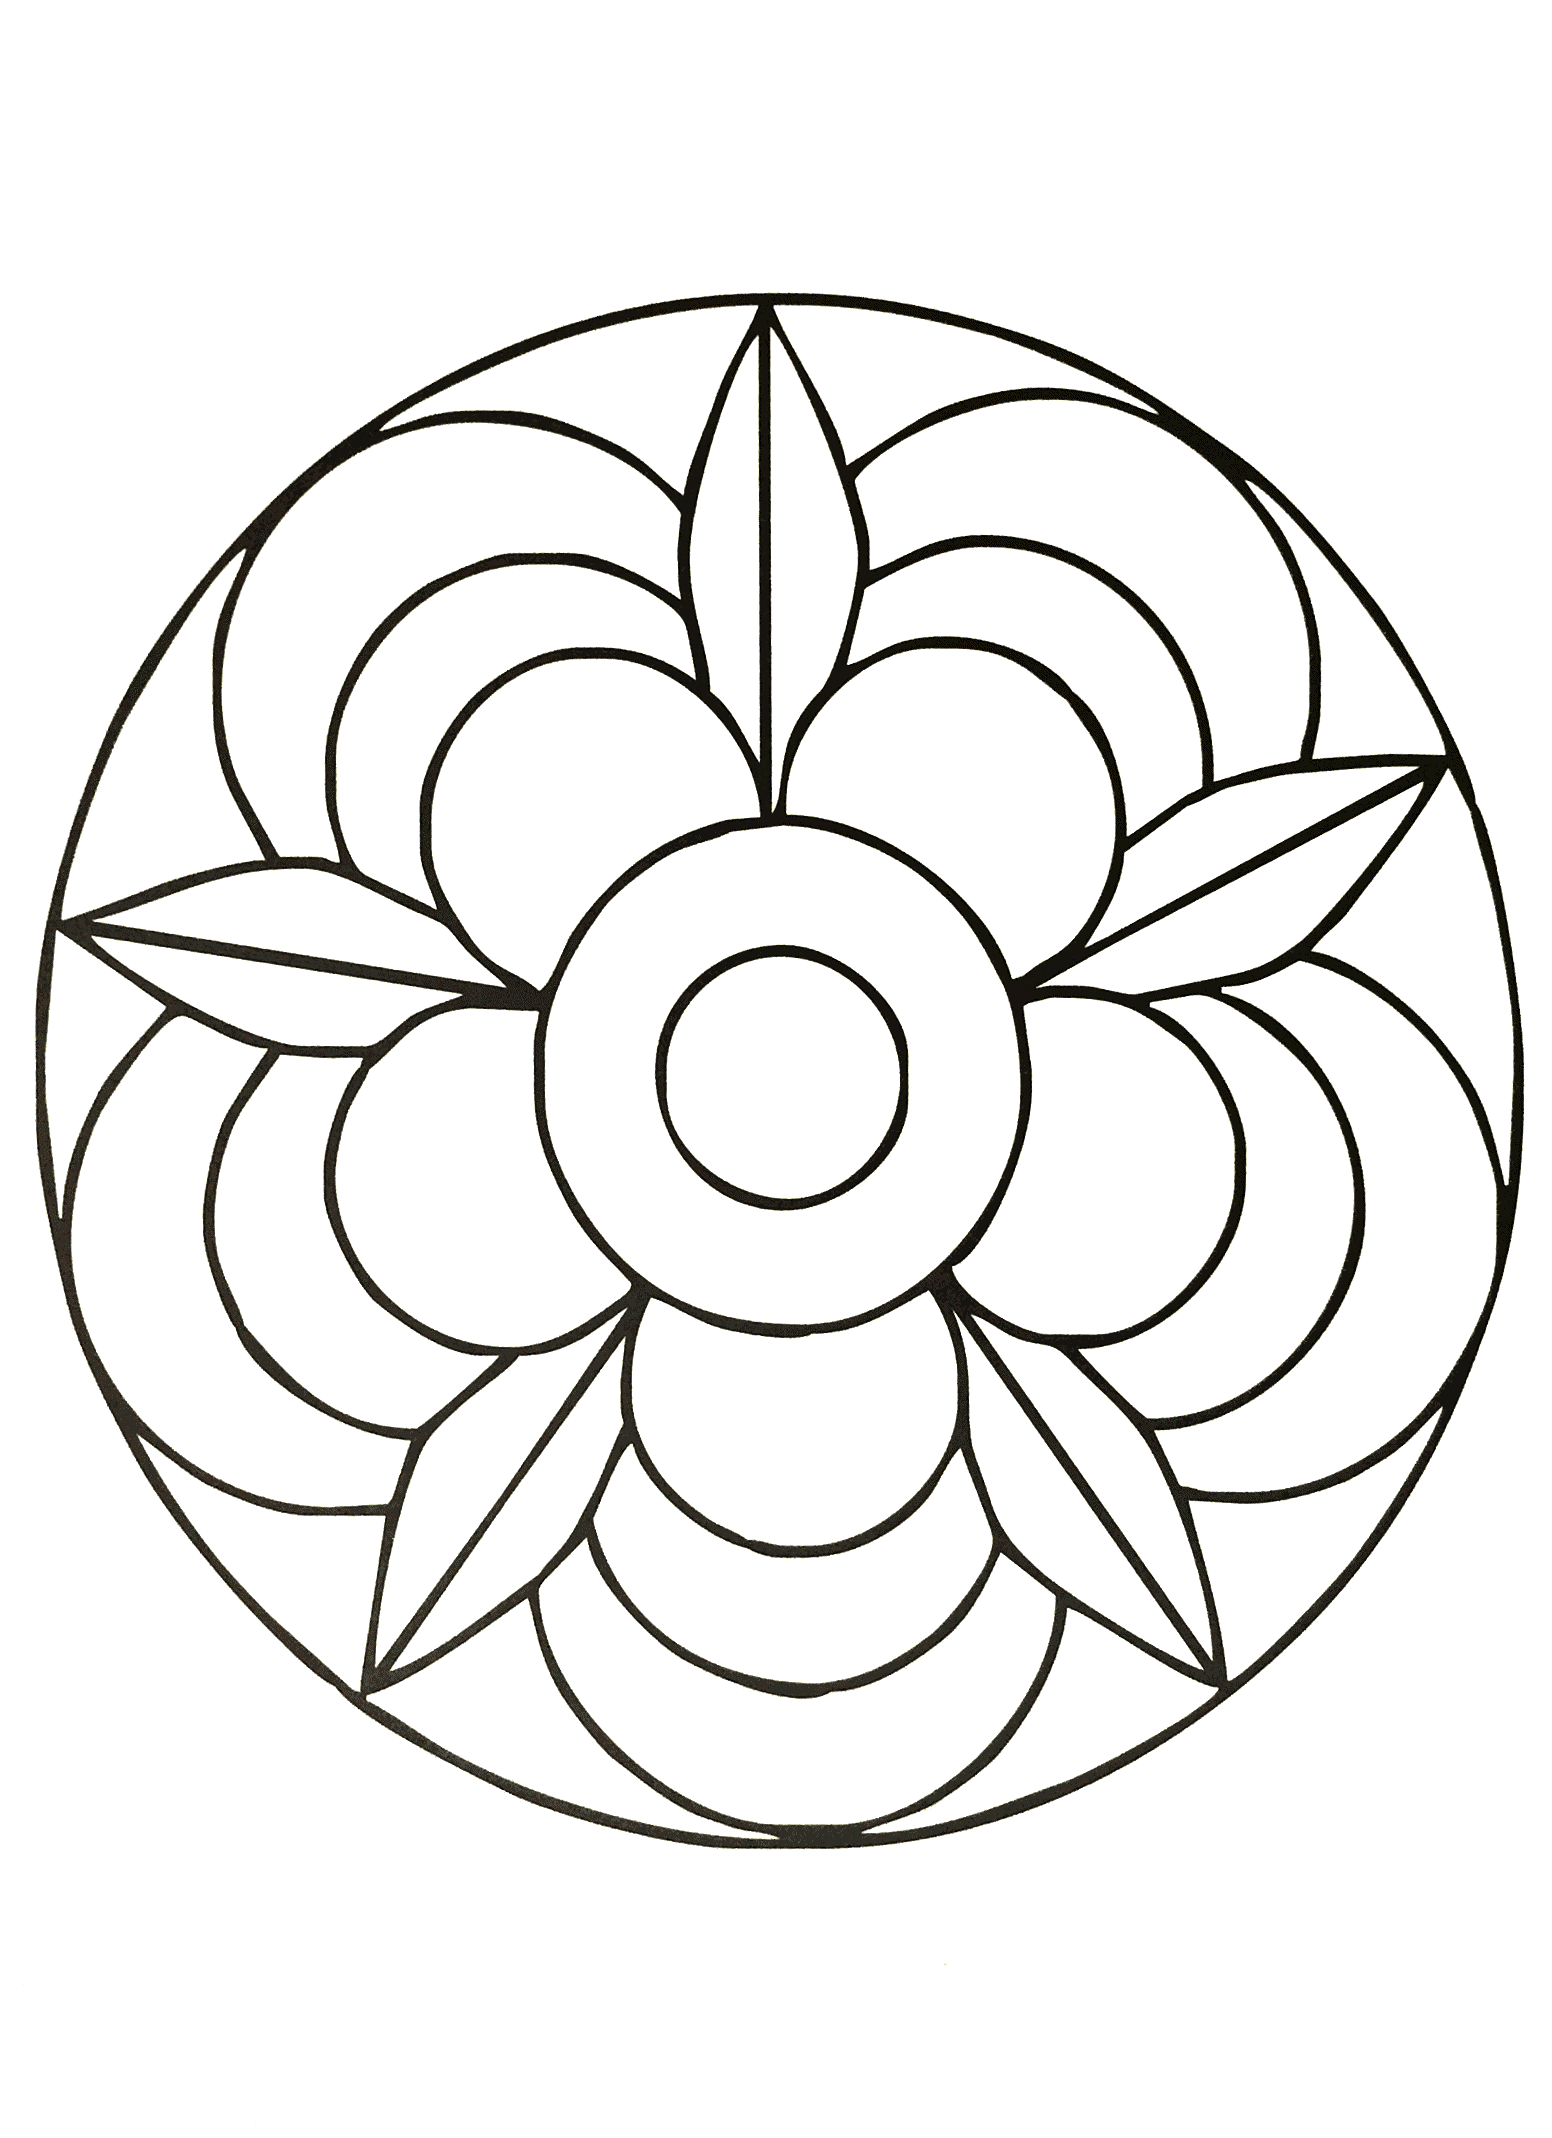 Mandala A Imprimer Mandalas-a-imprimer-8 - Mandalas Kids Coloring Pages